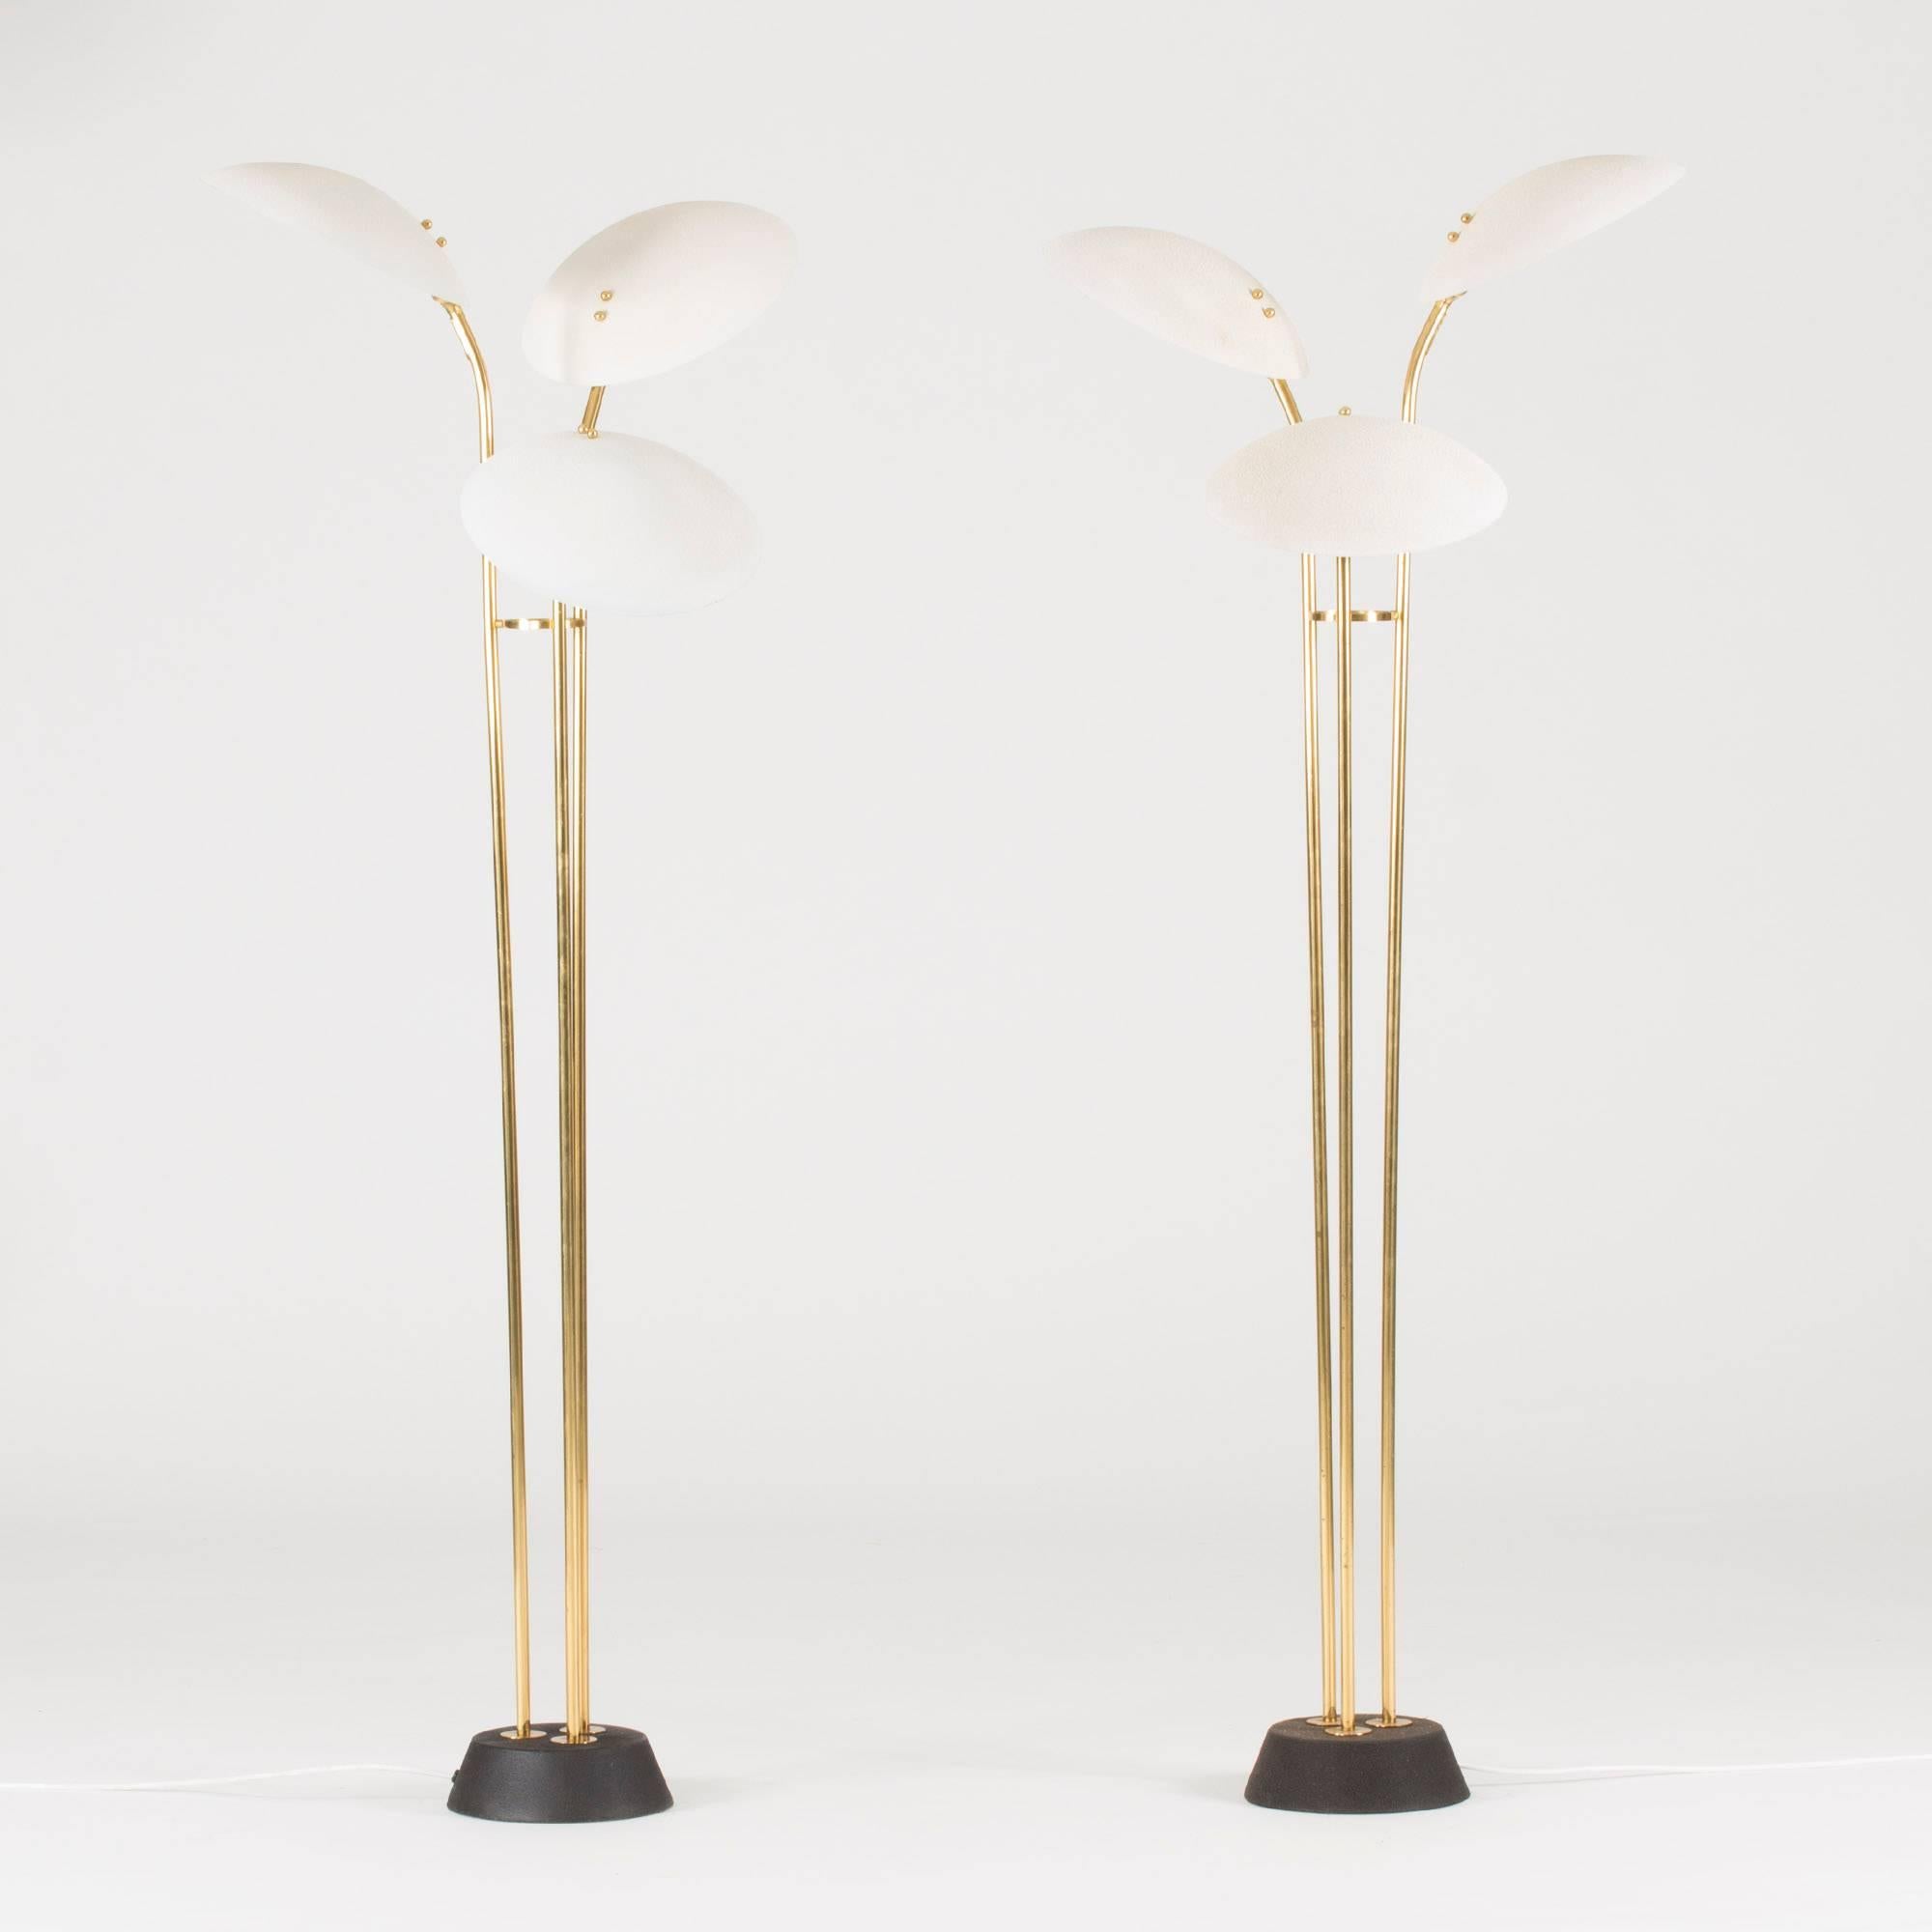 Pair of amazing brass floor lamps from Malmö Metallvarufabrik. Each lamp has three white lacquered circular shades decorated with little brass balls that hide the screws. Black lacquer on the bases.